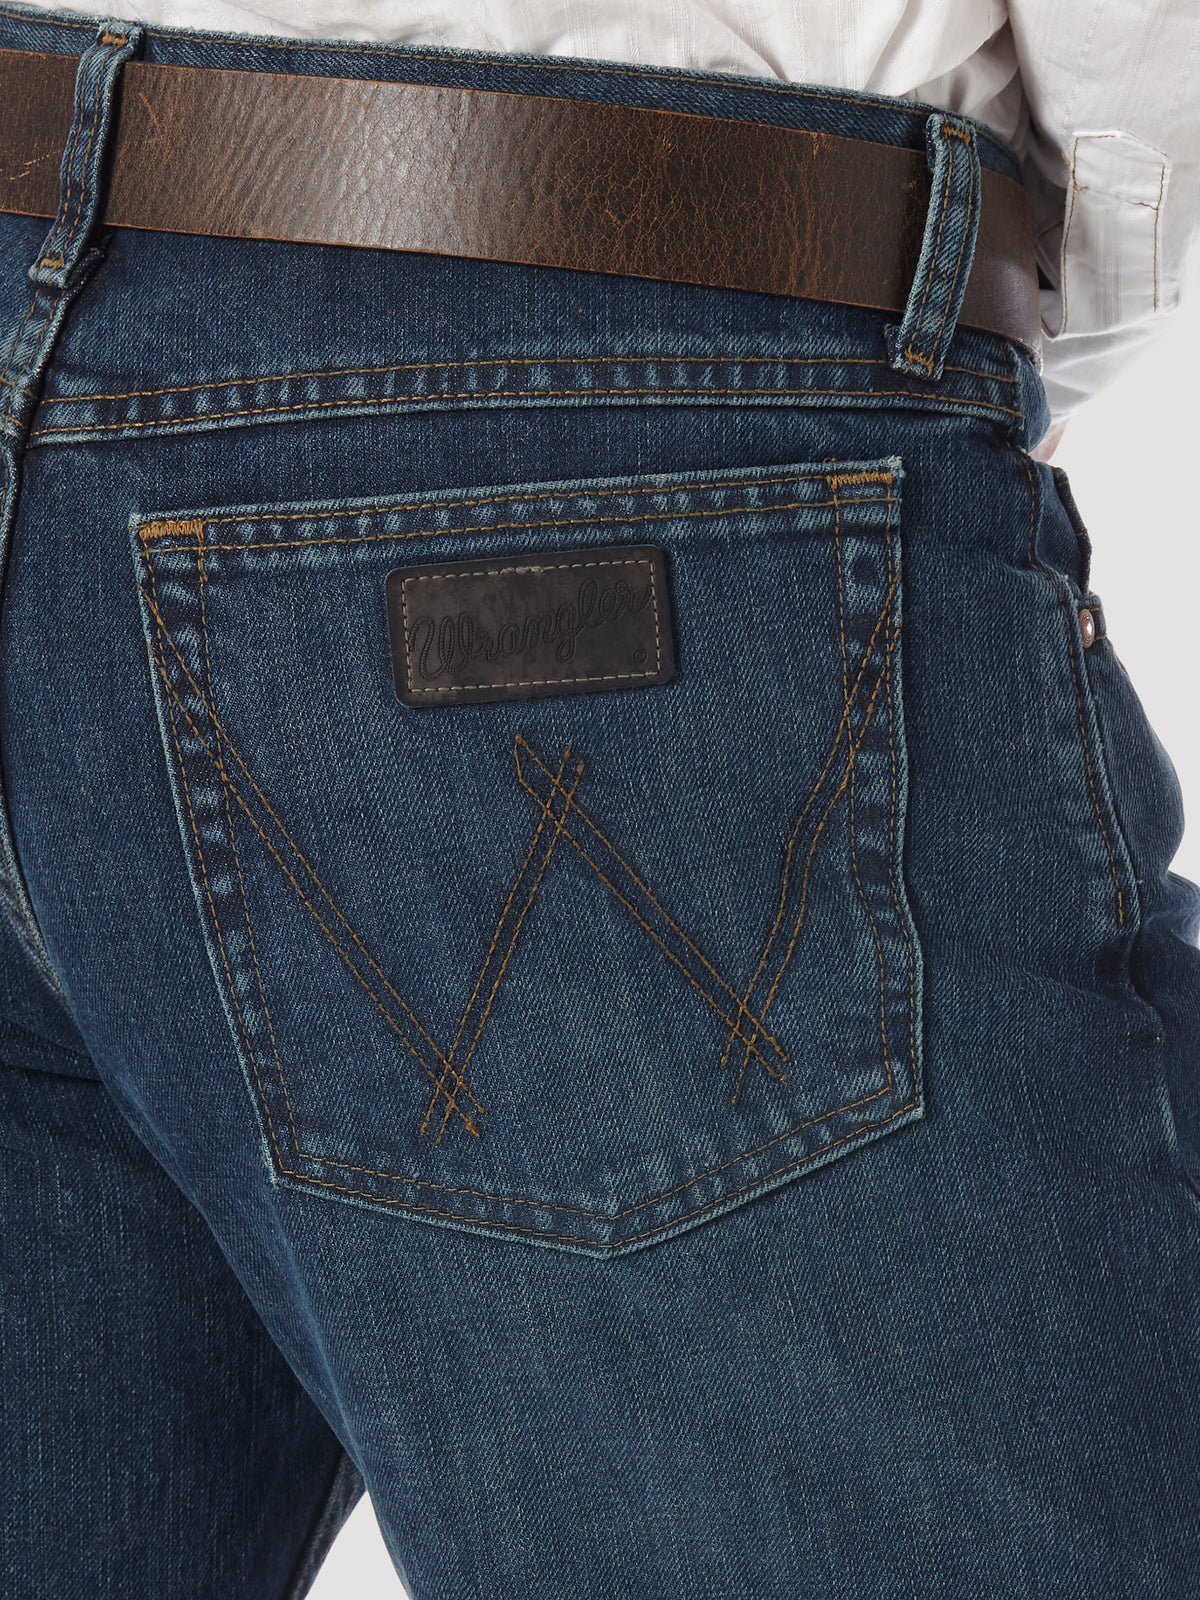 Men's Wrangler 20X 01 Competition Jean #01MWXRW | High Country Western Wear